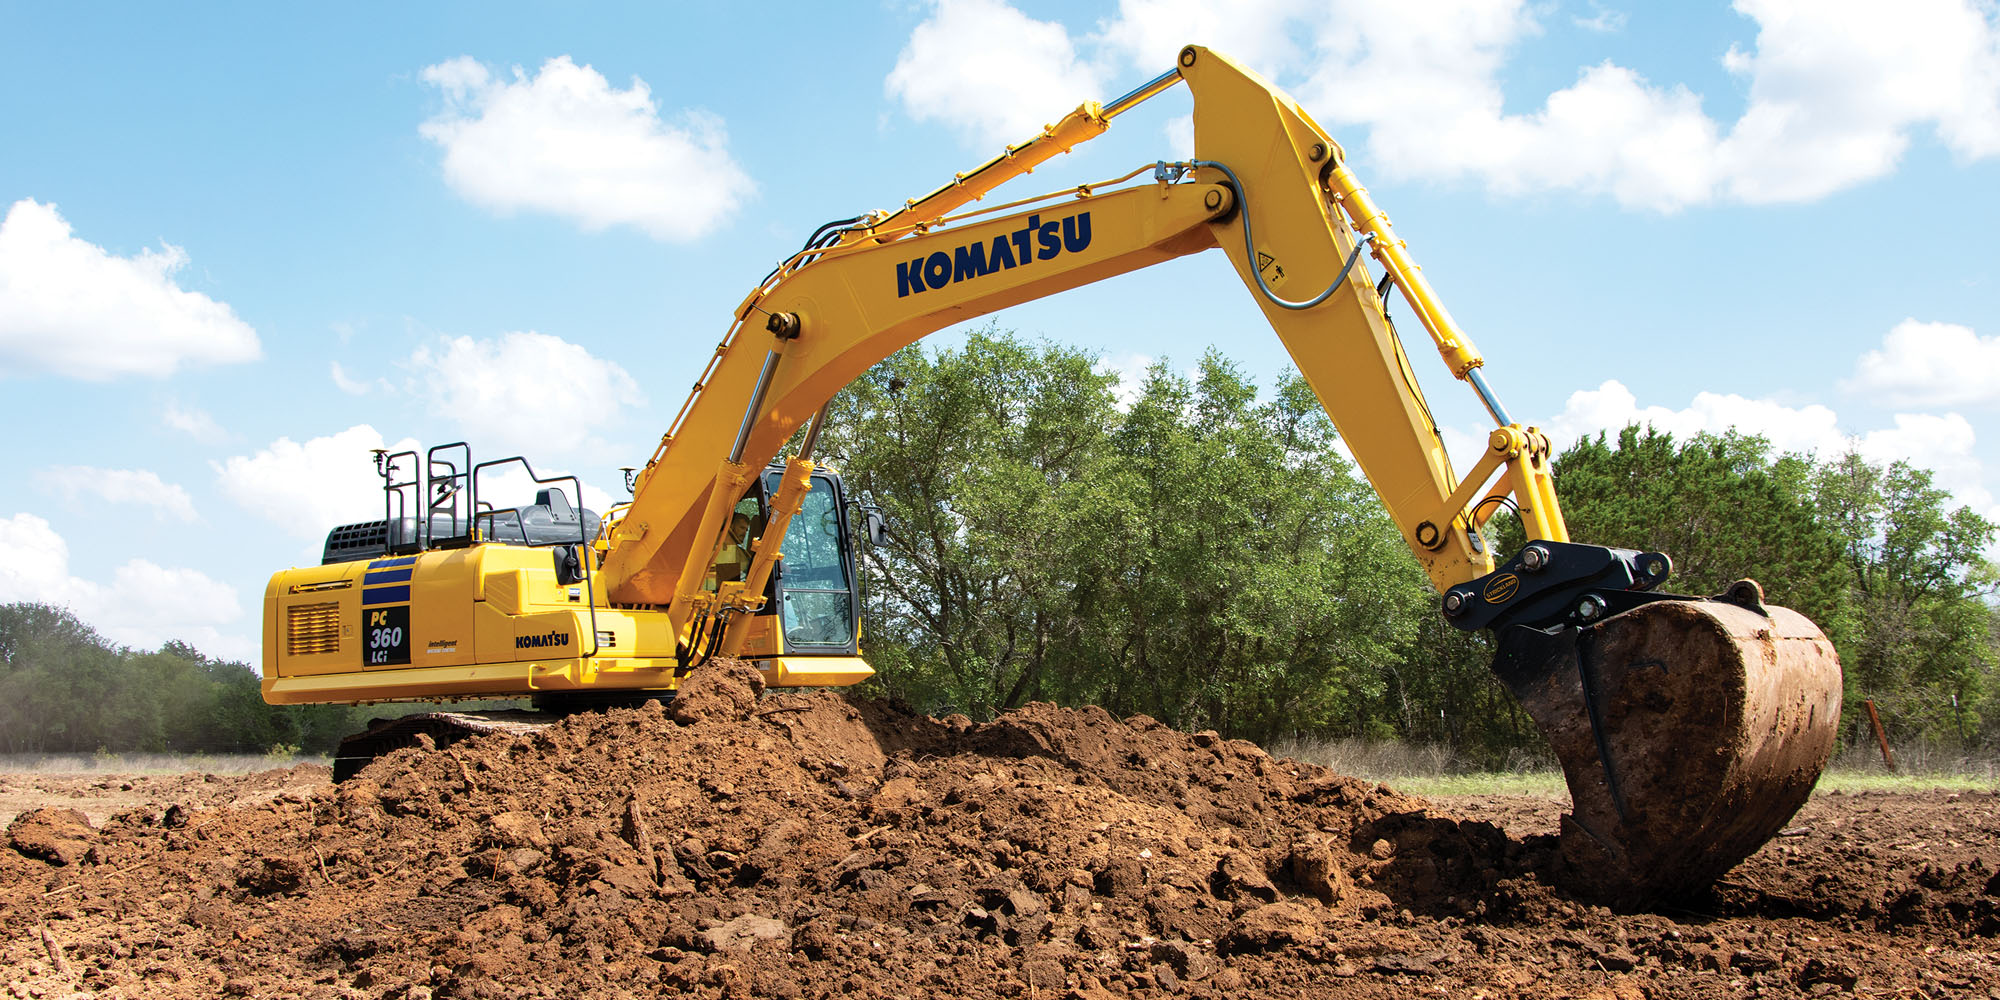 Residential, Commercial Contractor Sees Sizable Savings with intelligent Machine Control Excavators